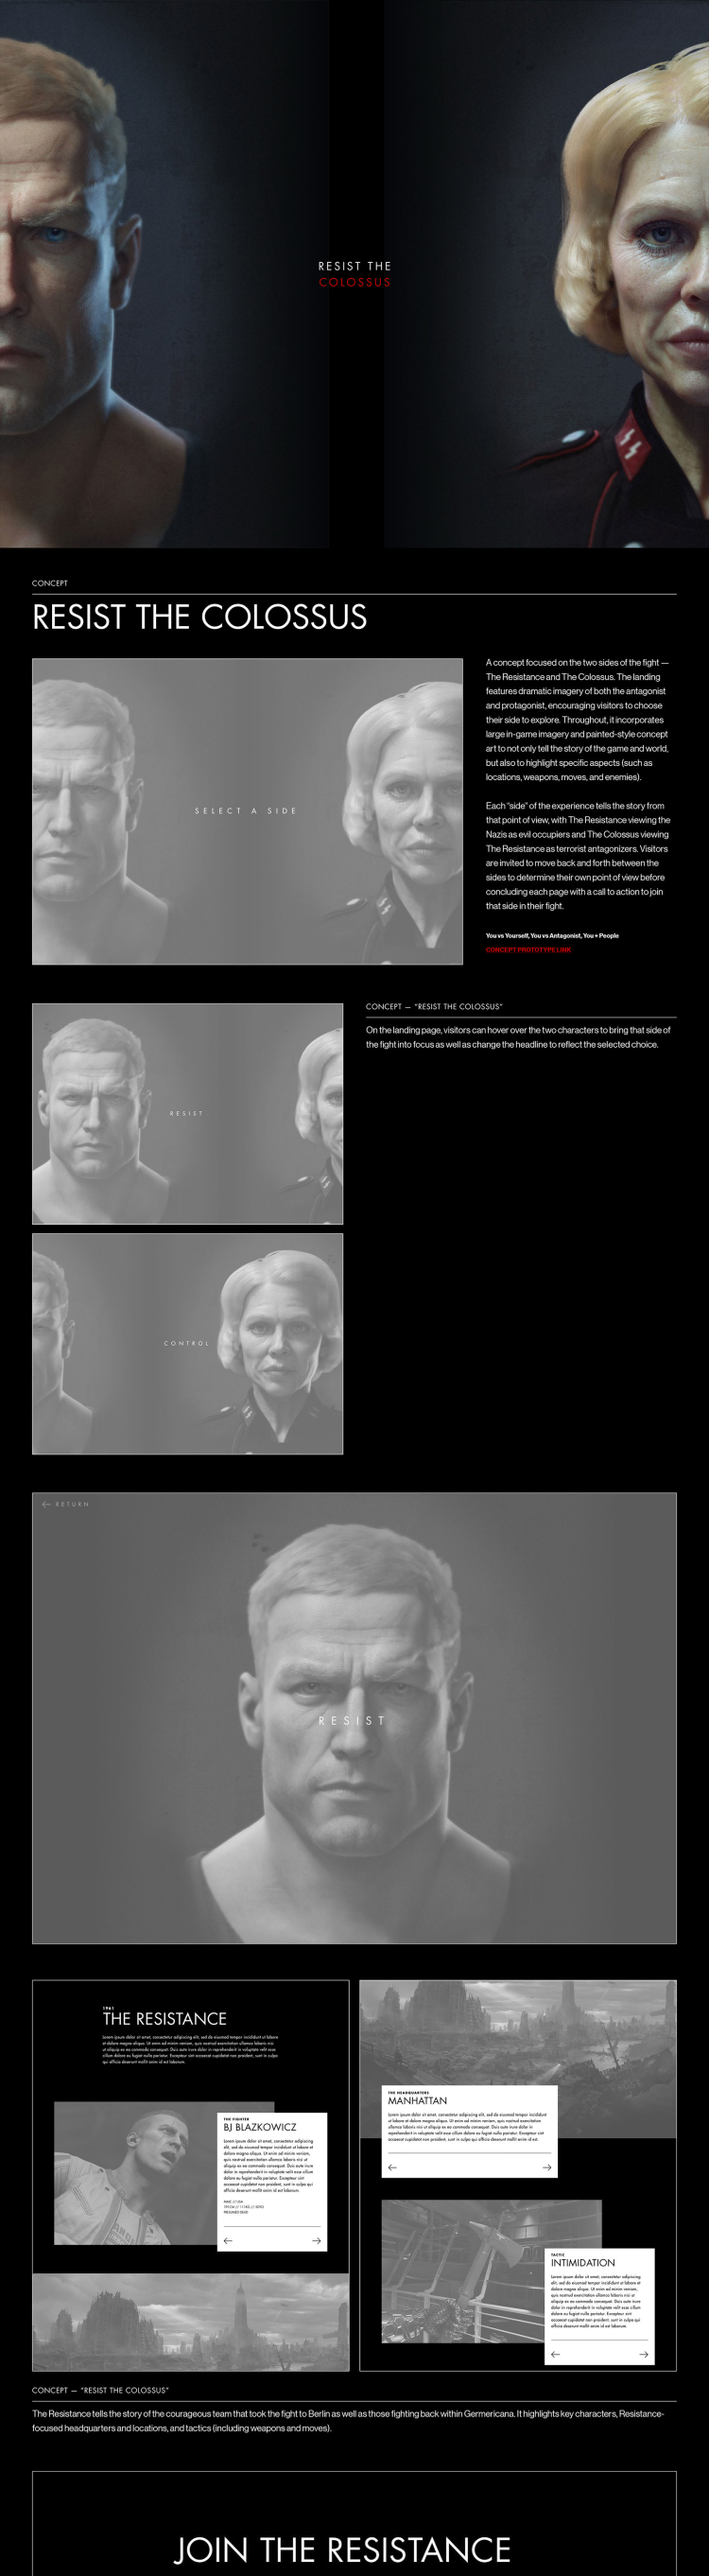 Initial "Resist" concept for the Wolfenstein II site